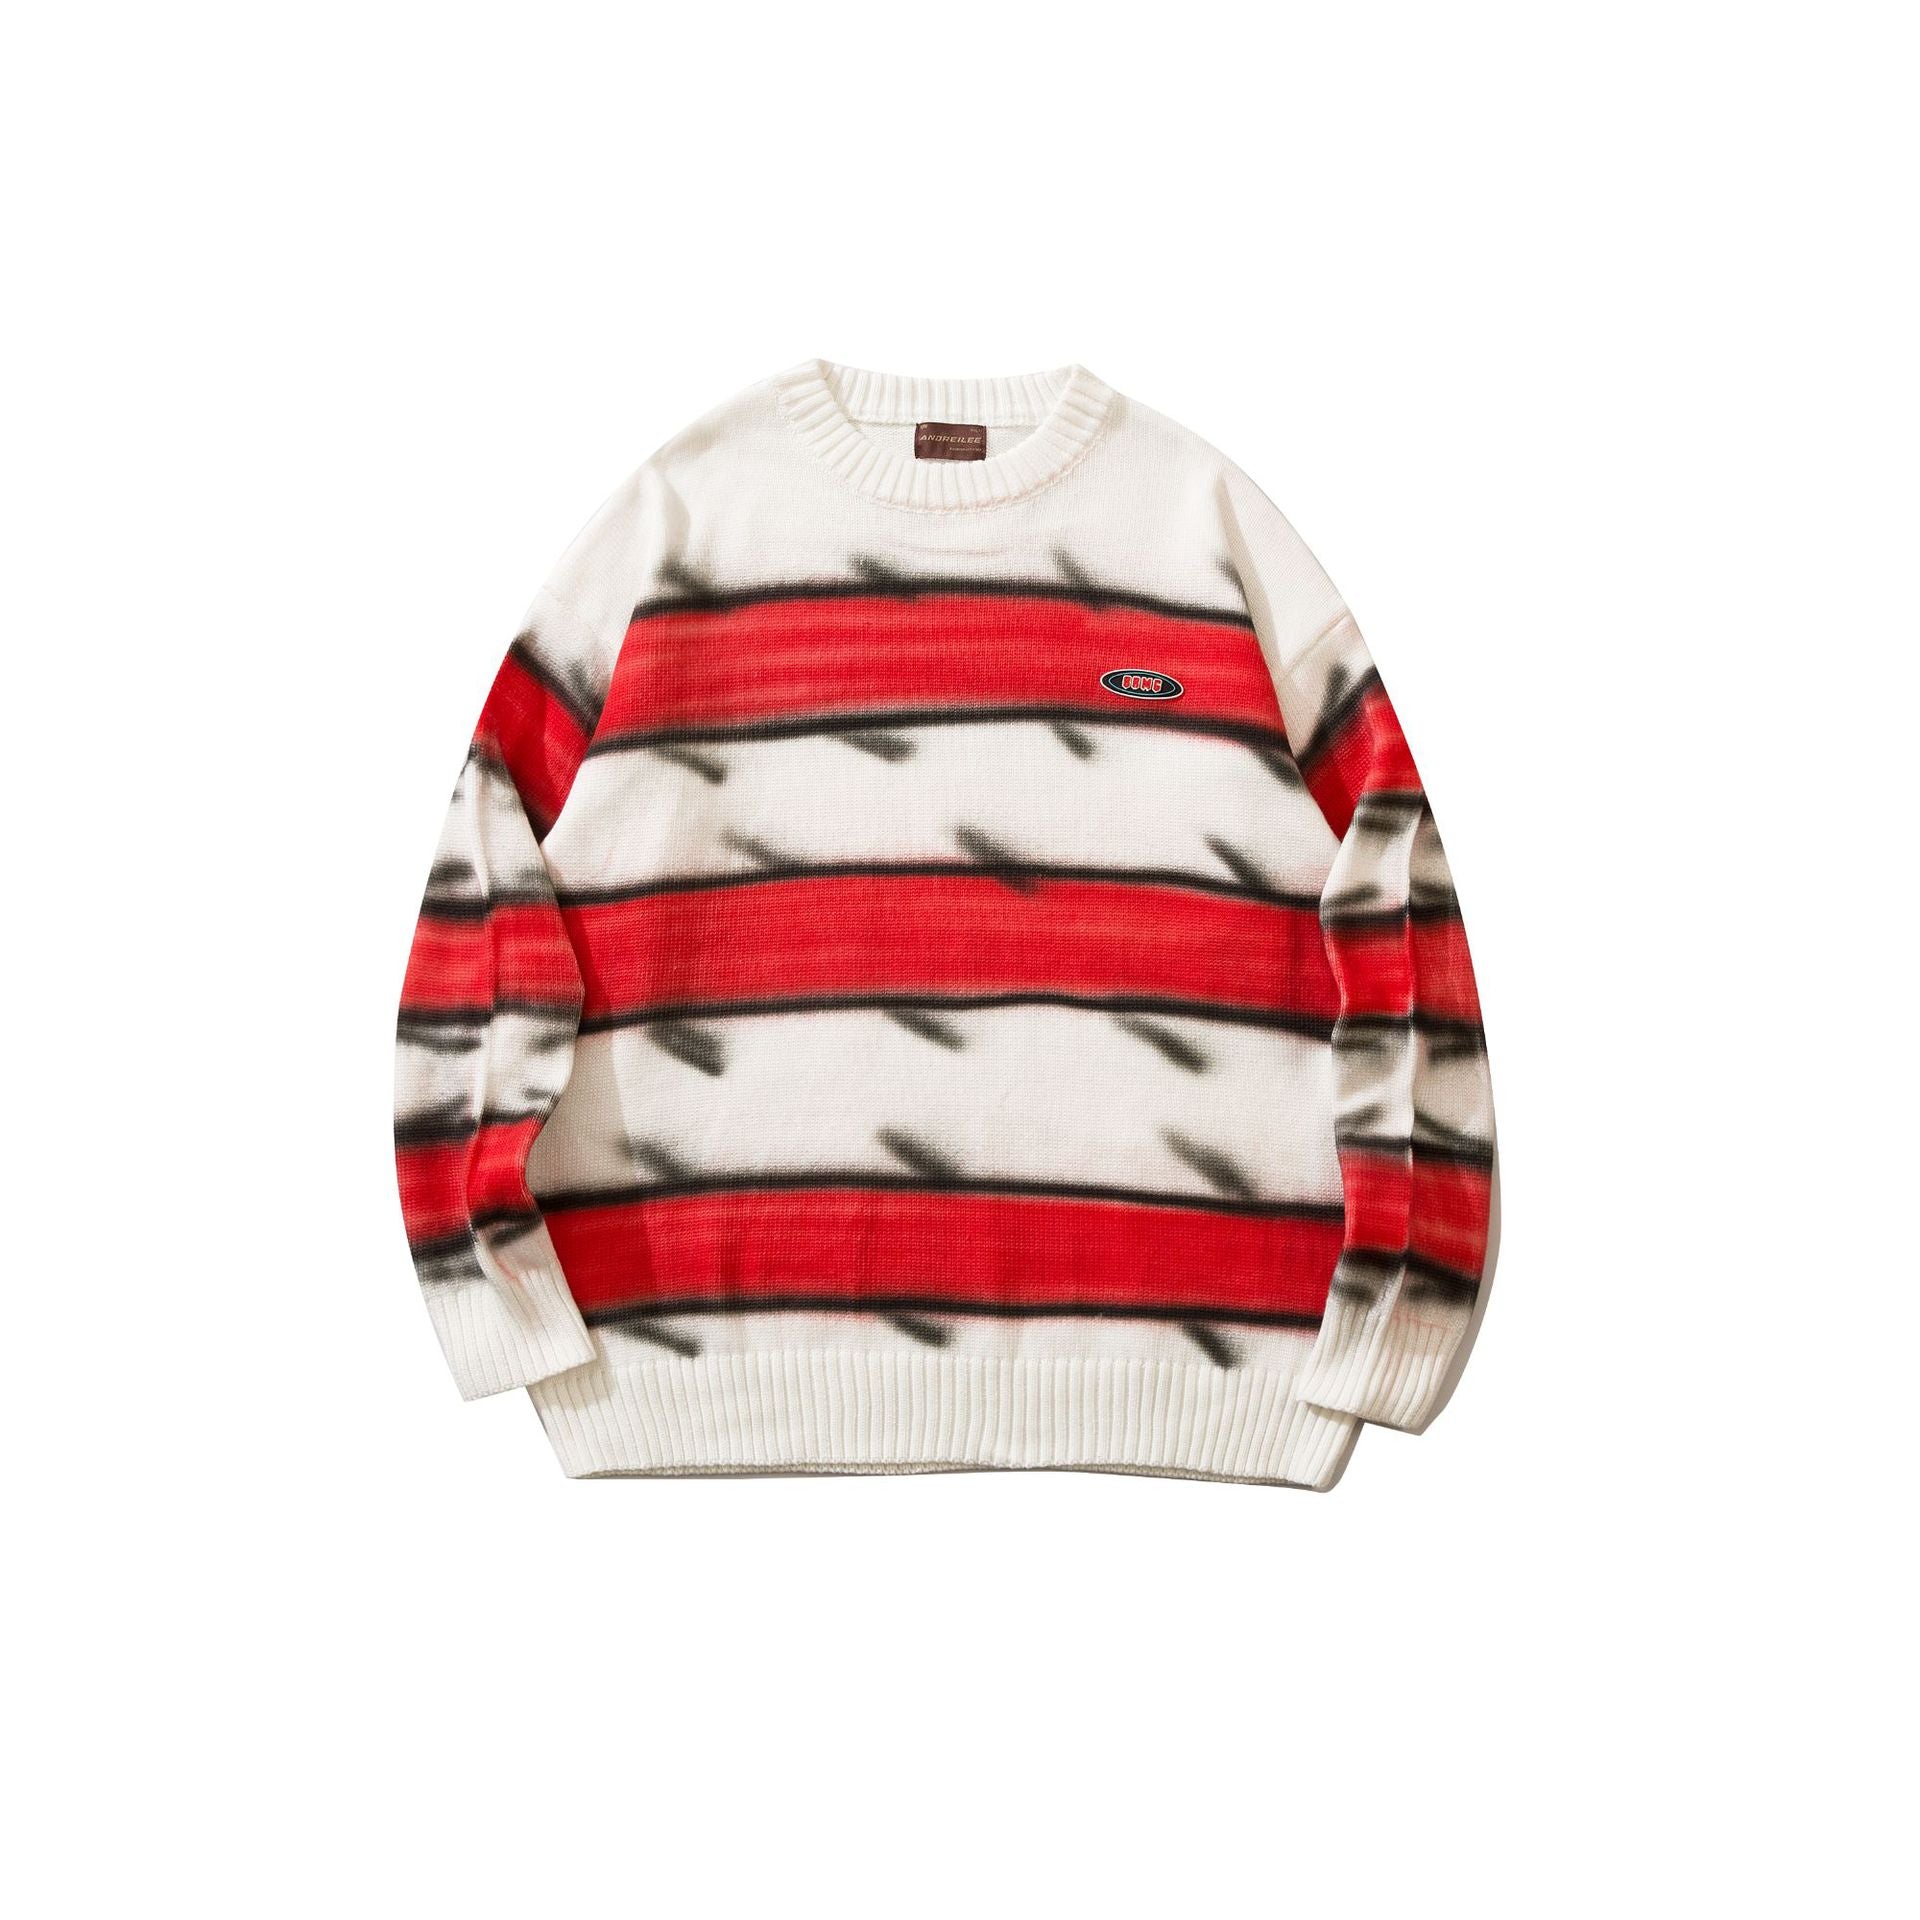 Striped Pullovers Knitted Sweater - White / M